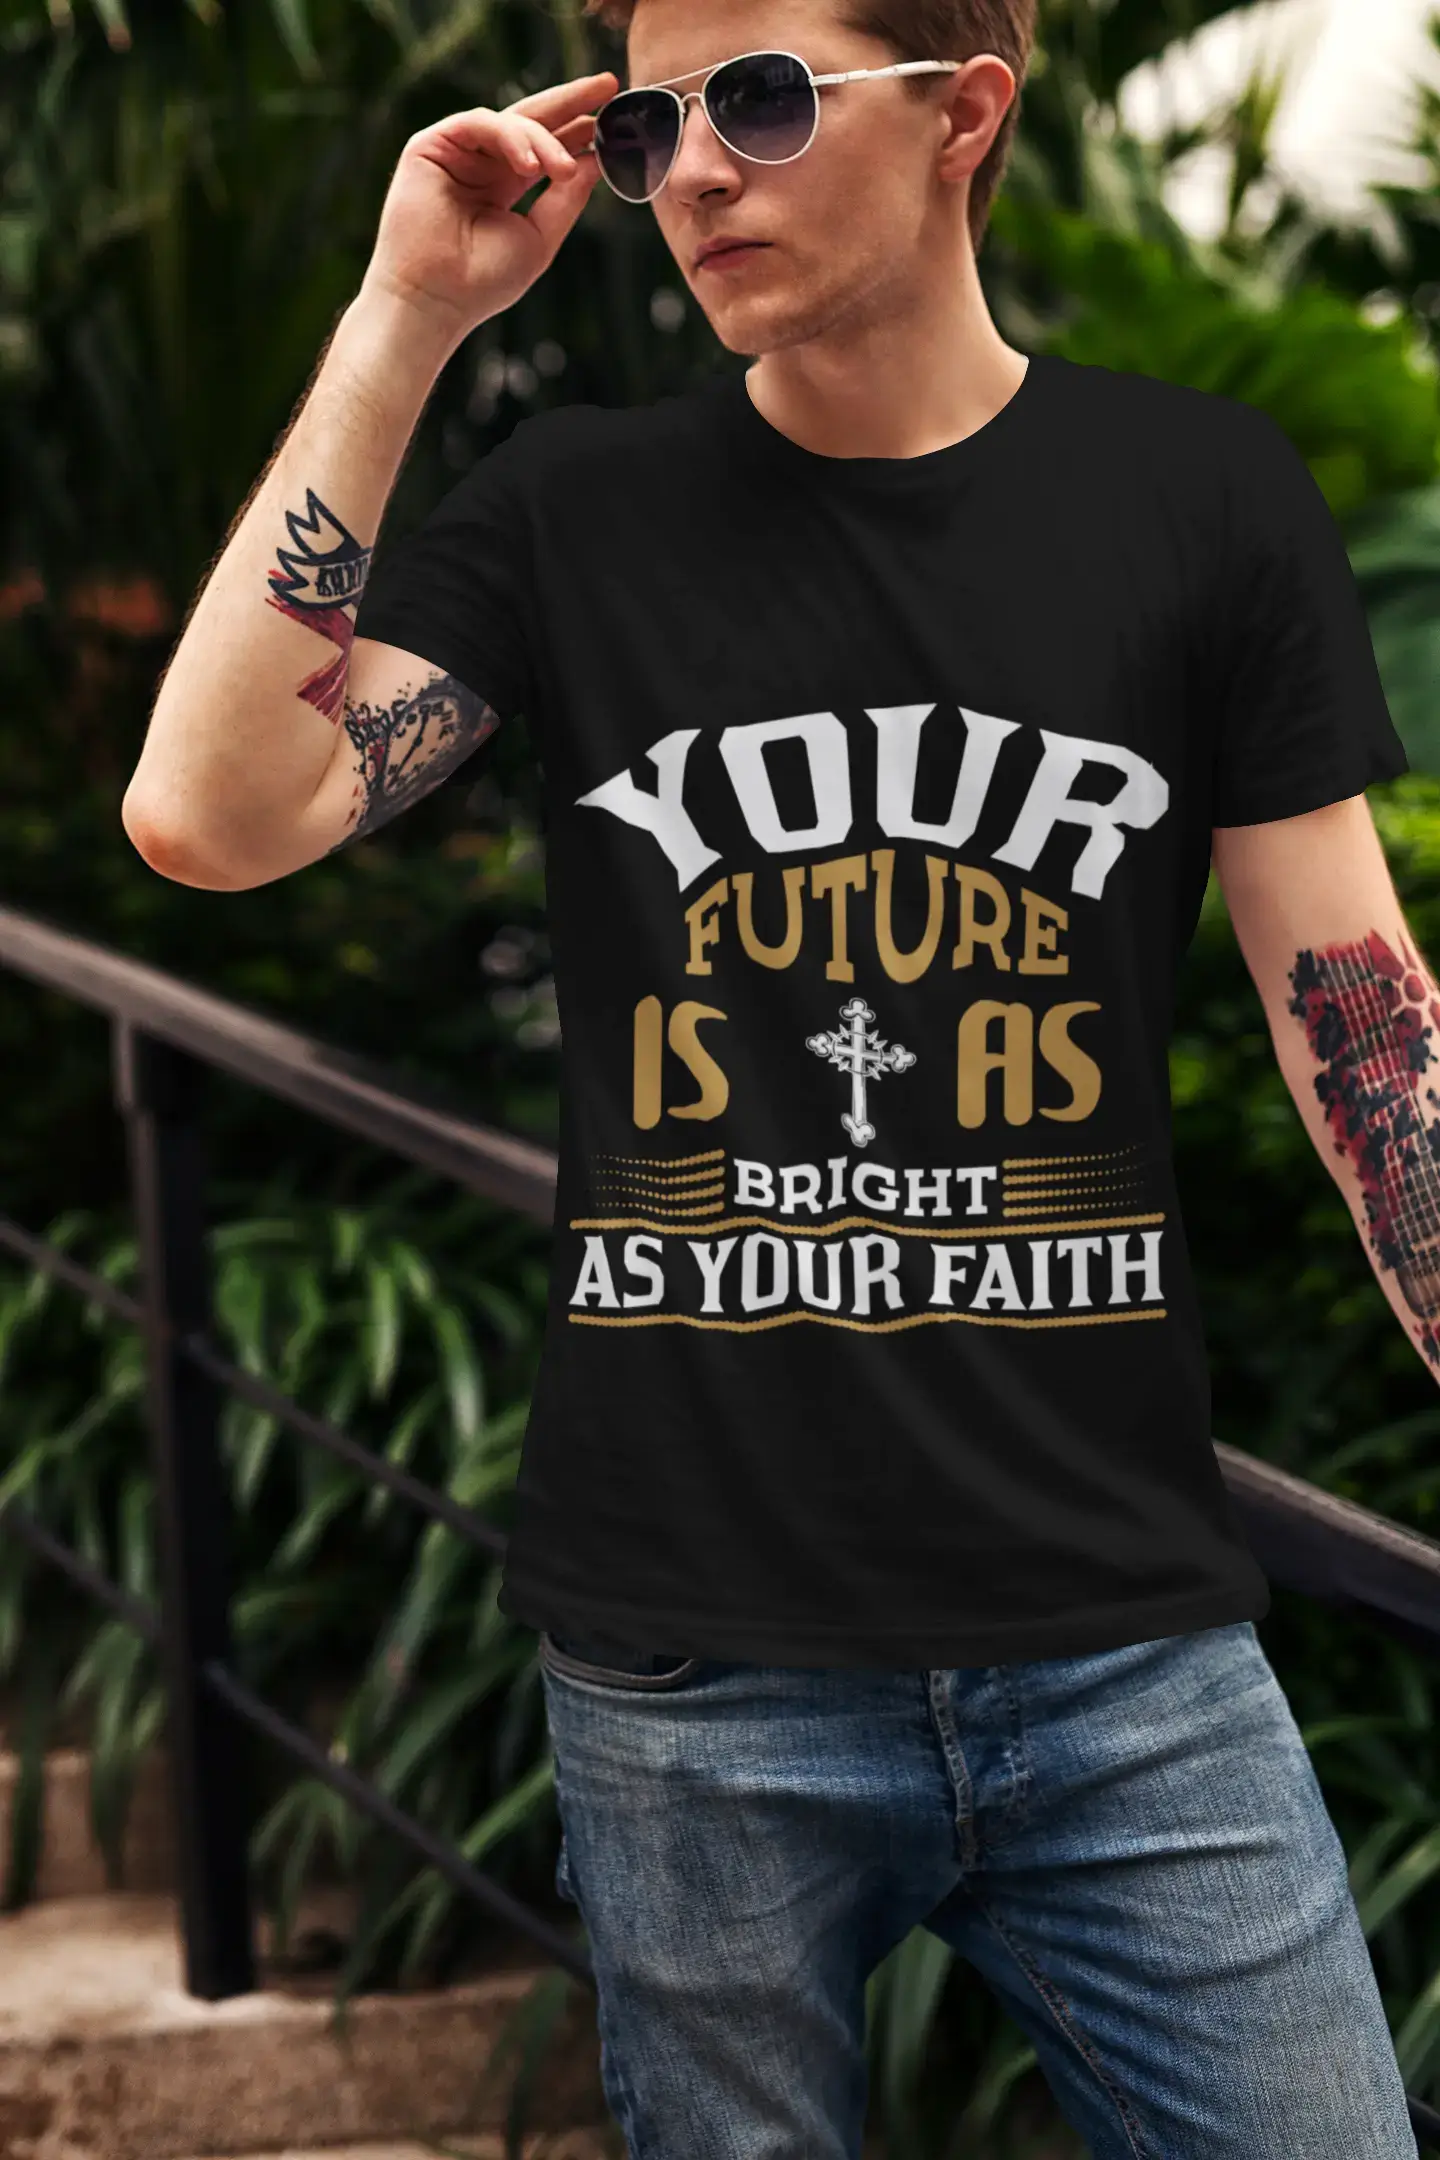 ULTRABASIC Men's Religious T-Shirt Your Future is as Bright as Your Faith Shirt